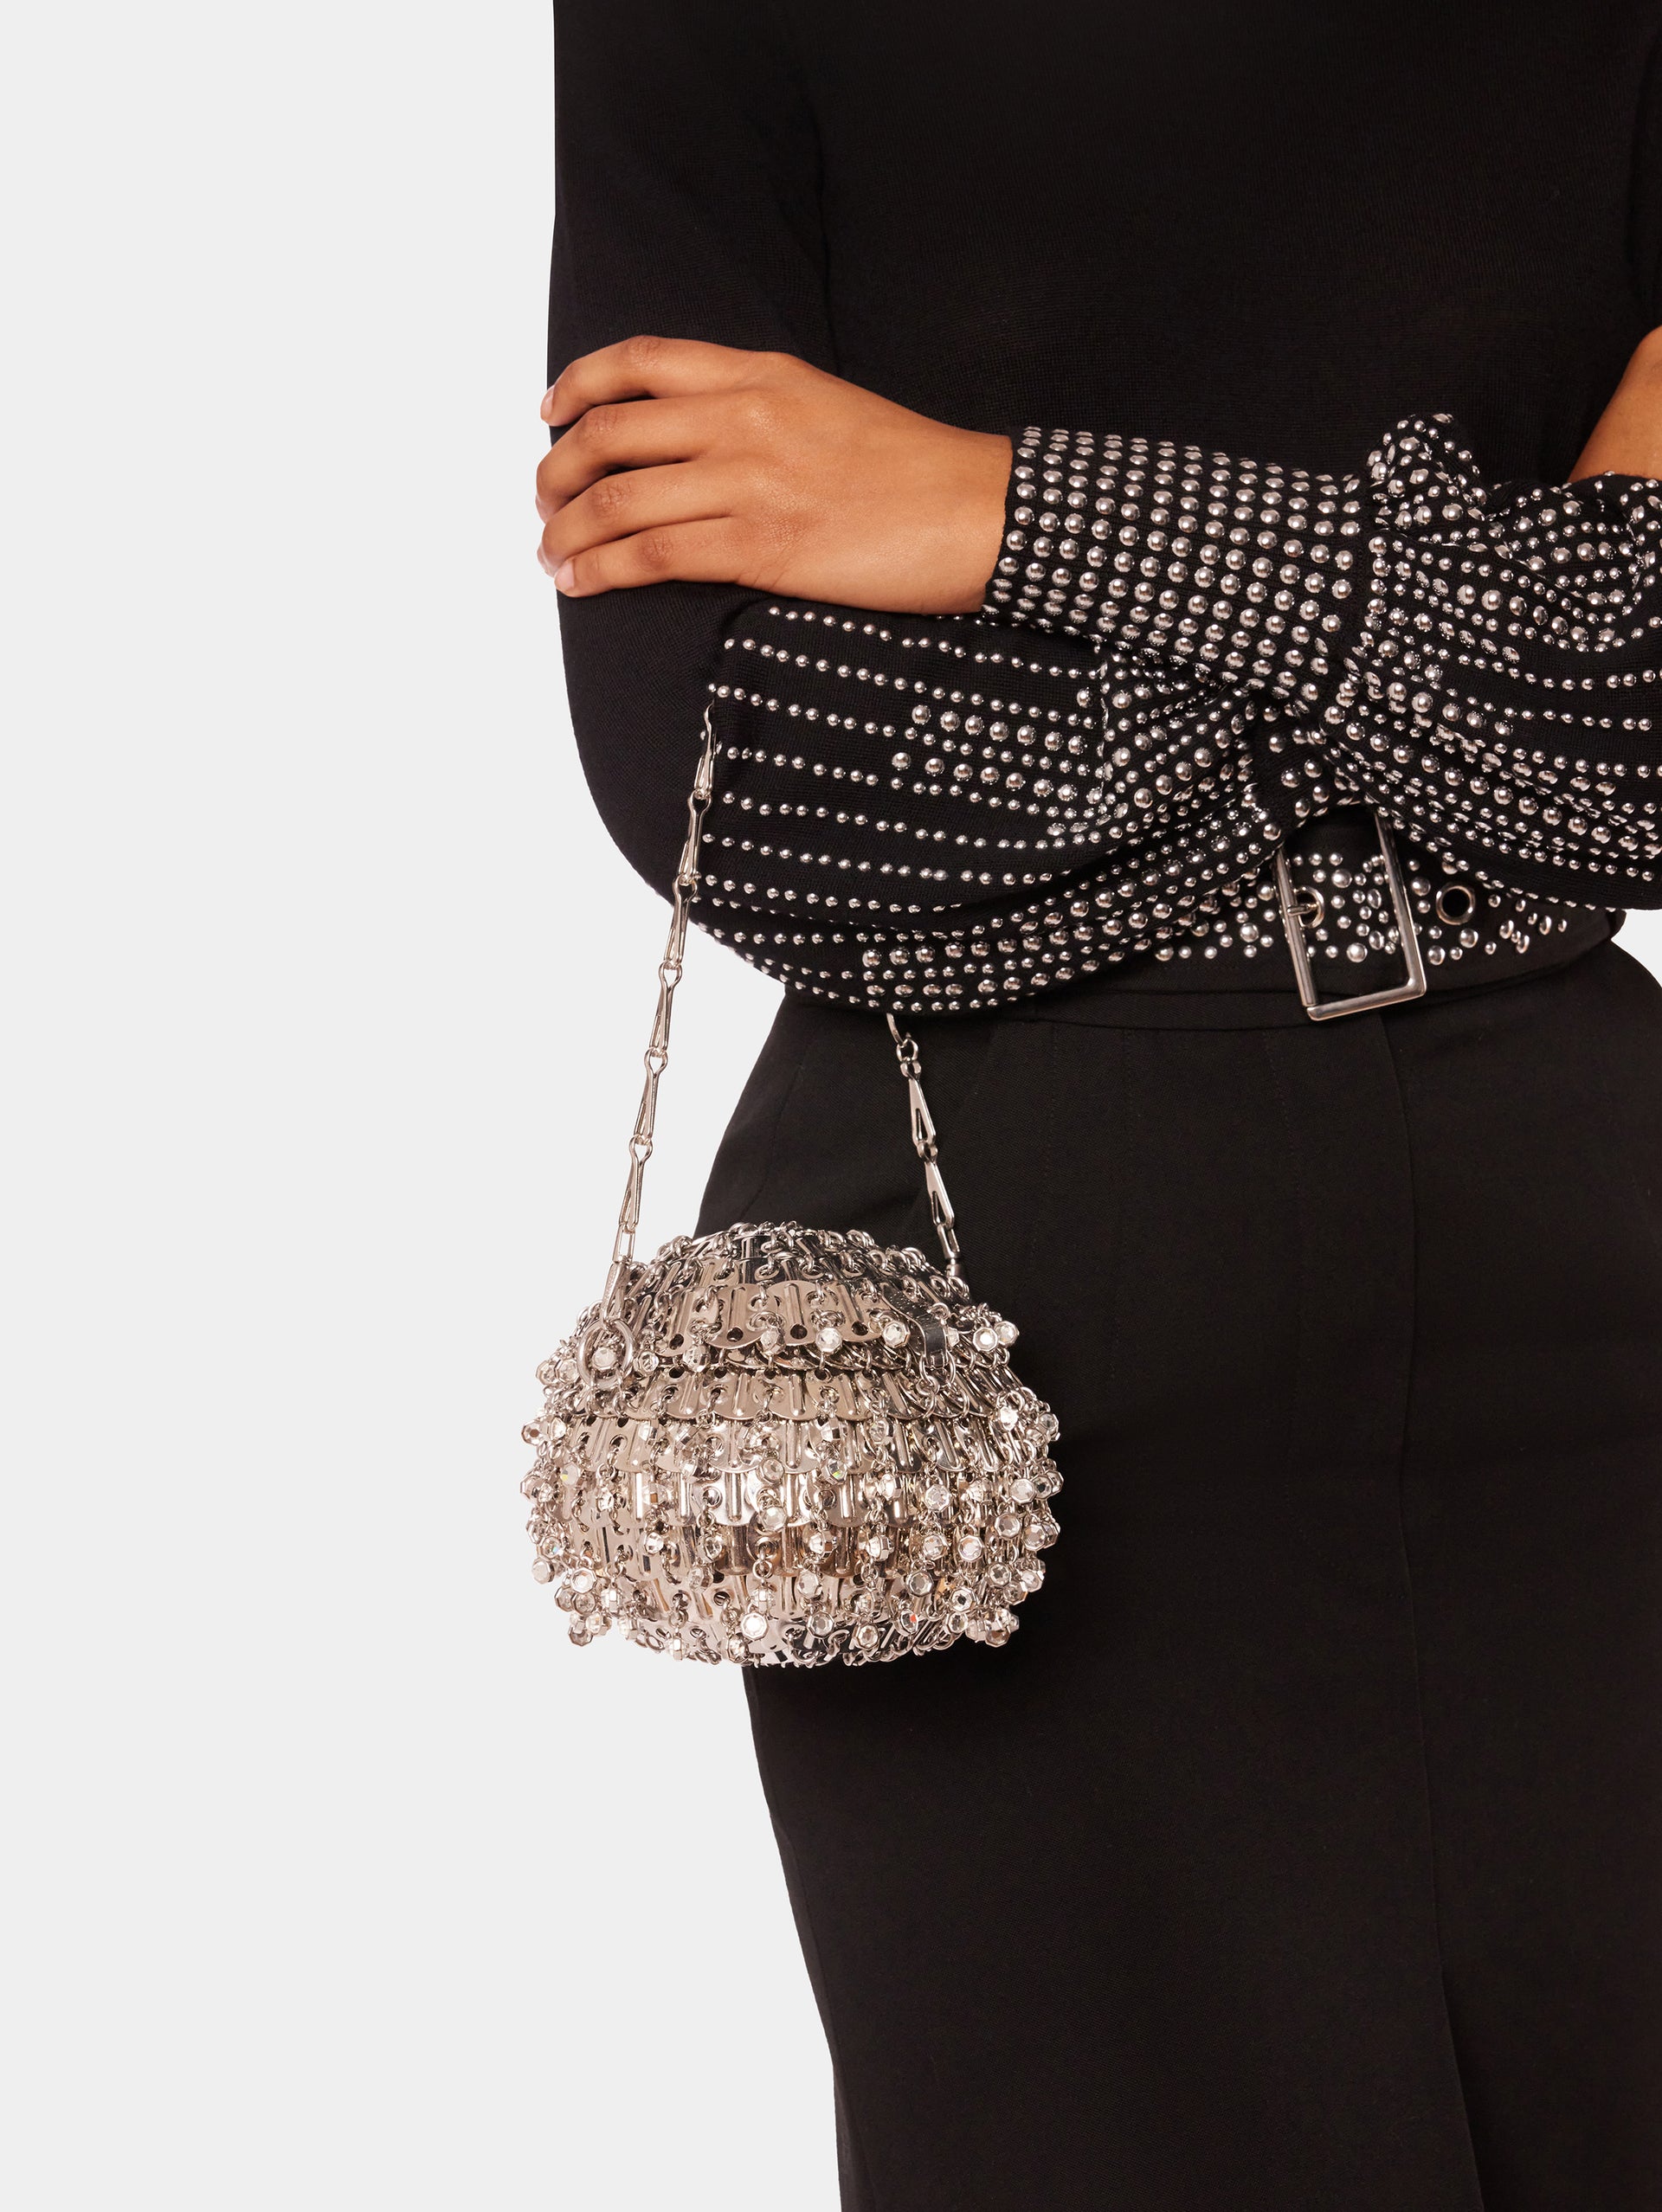 1969 Silver Sphere Bag with Crystals